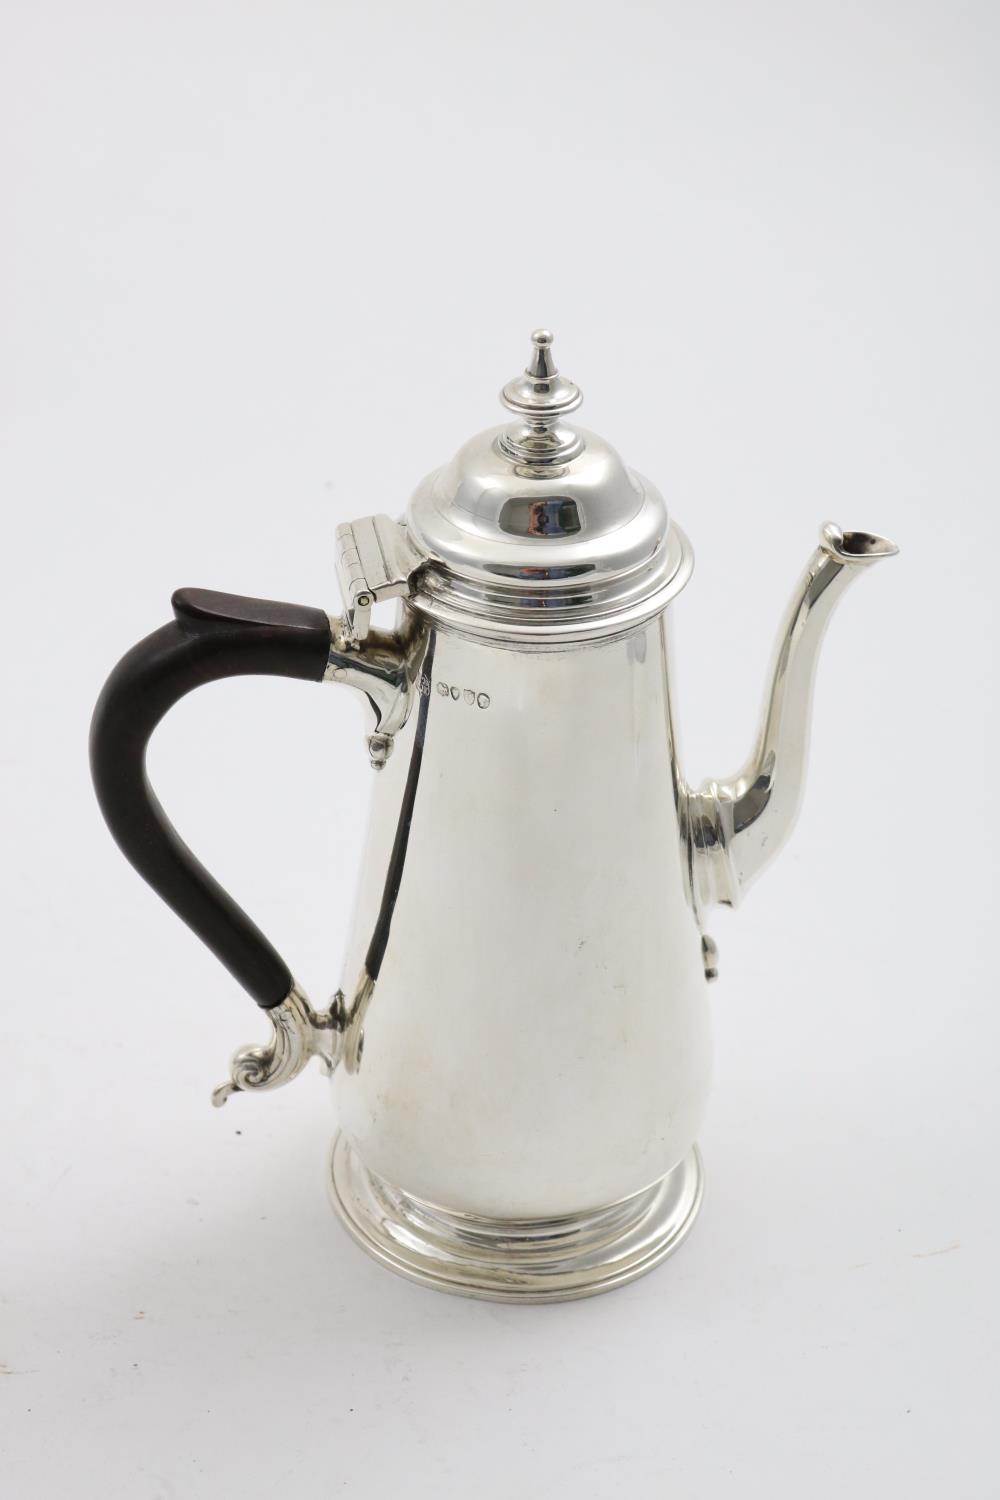 A LATE VICTORIAN COFFEE POT with a domed cover, knop finial, and a spreading circular foot, by T.